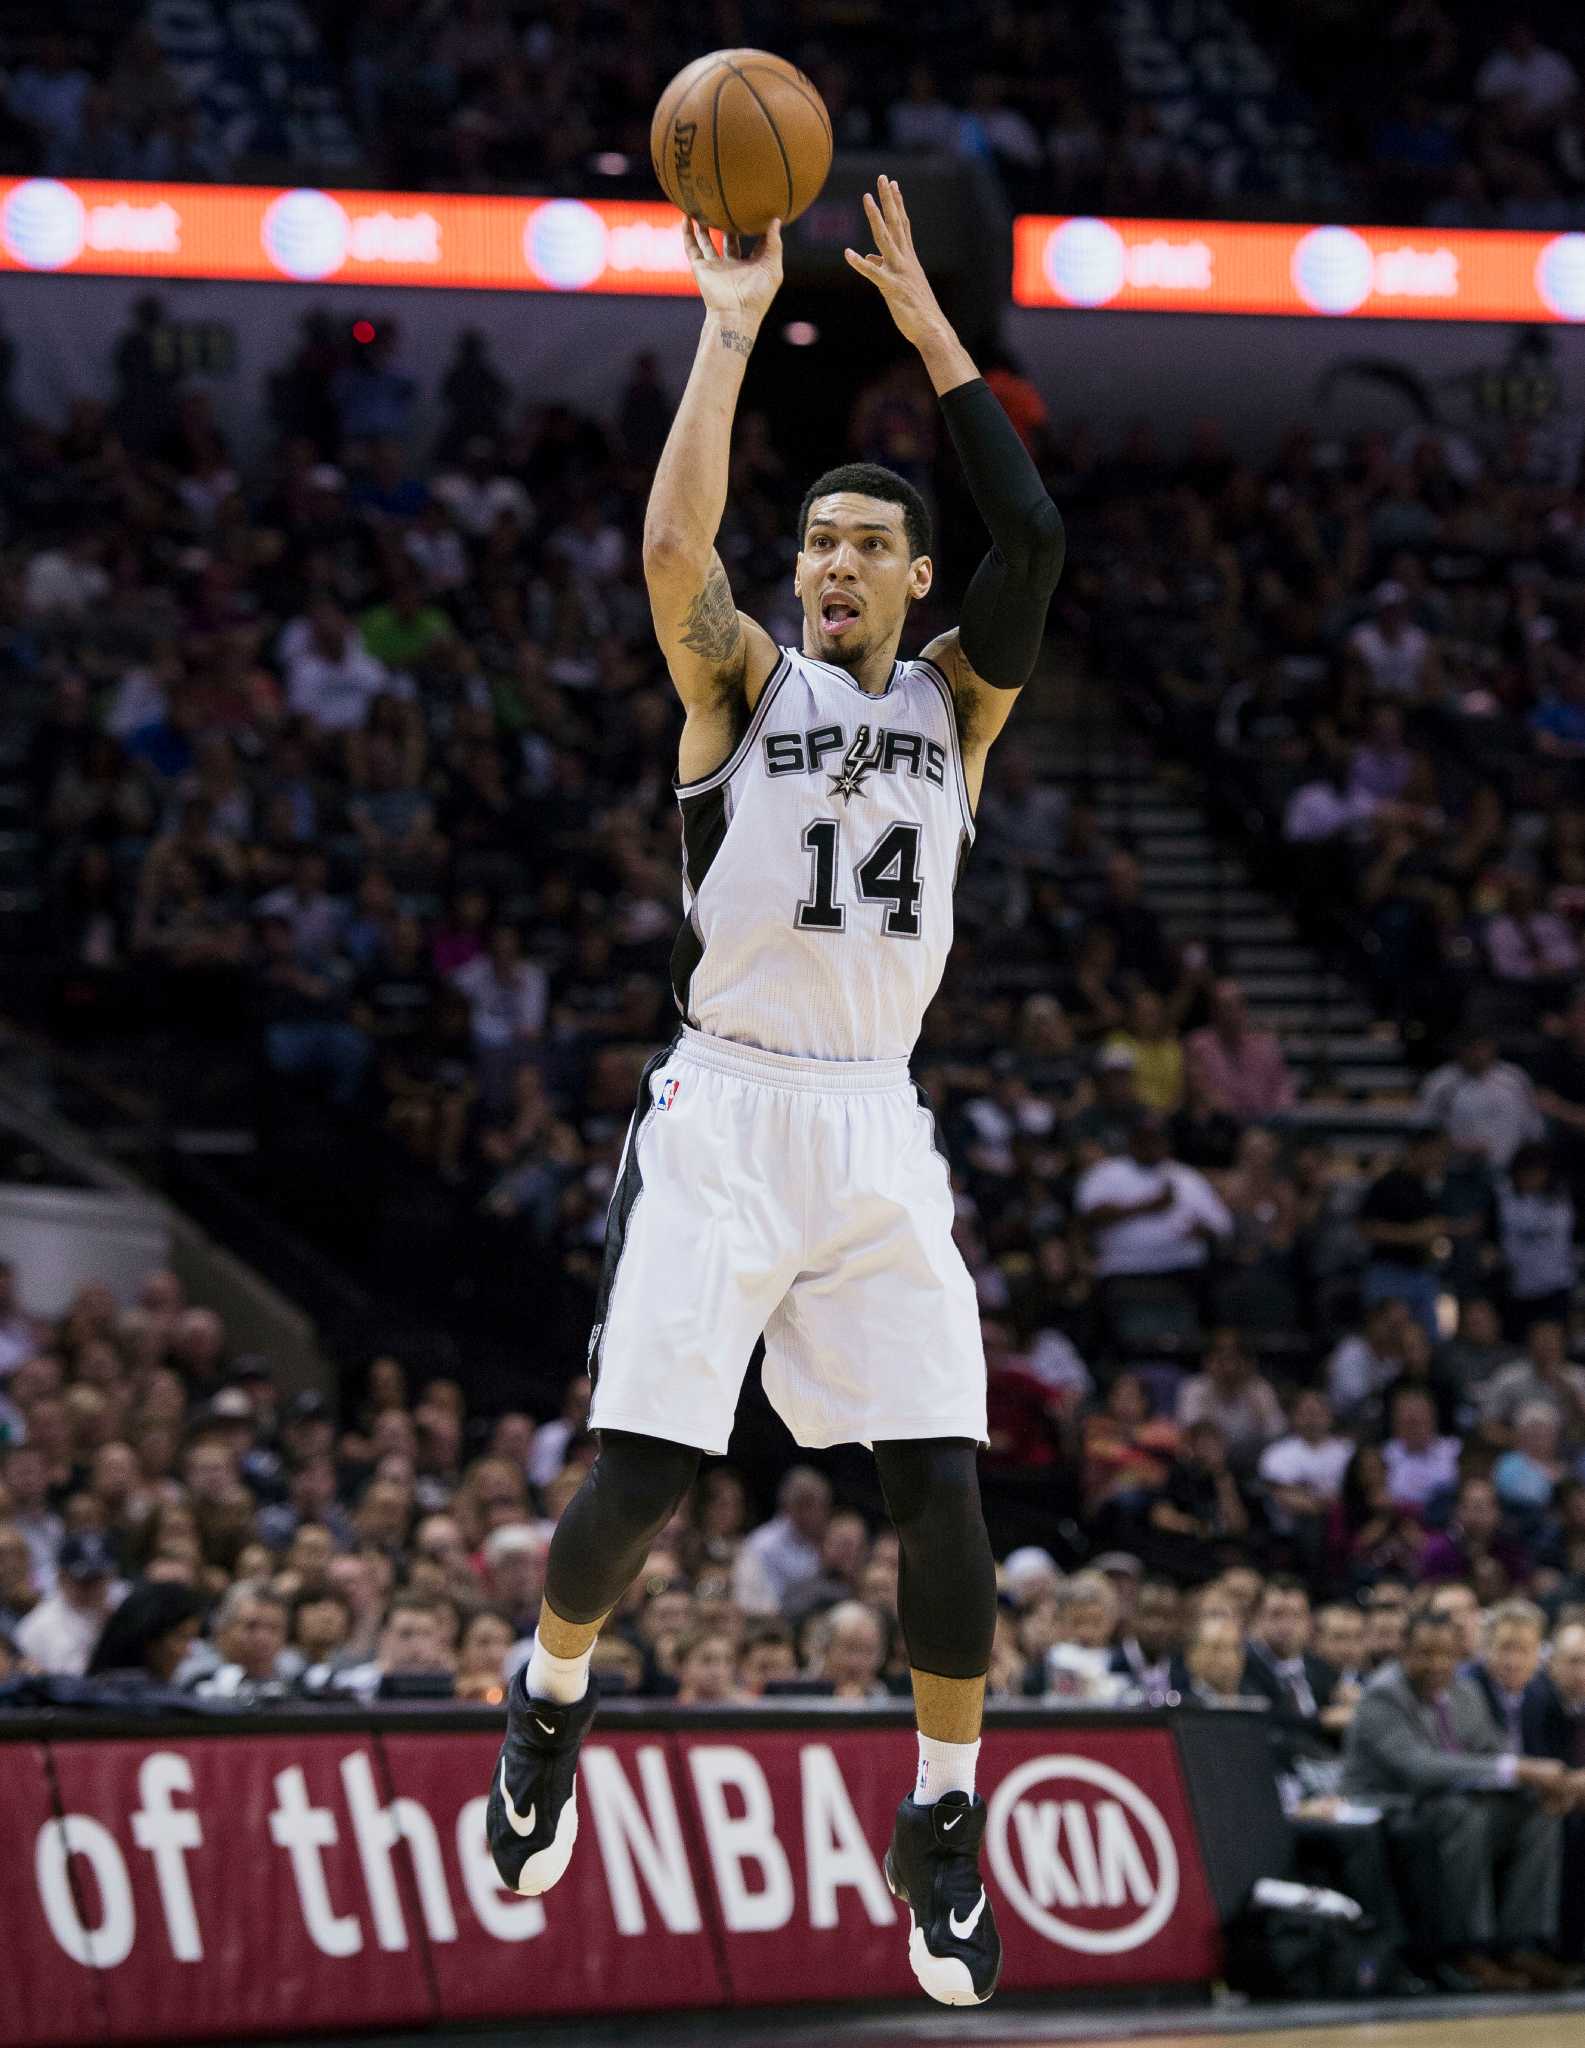 Spurs sharpshooter Danny Green has been worse than you think